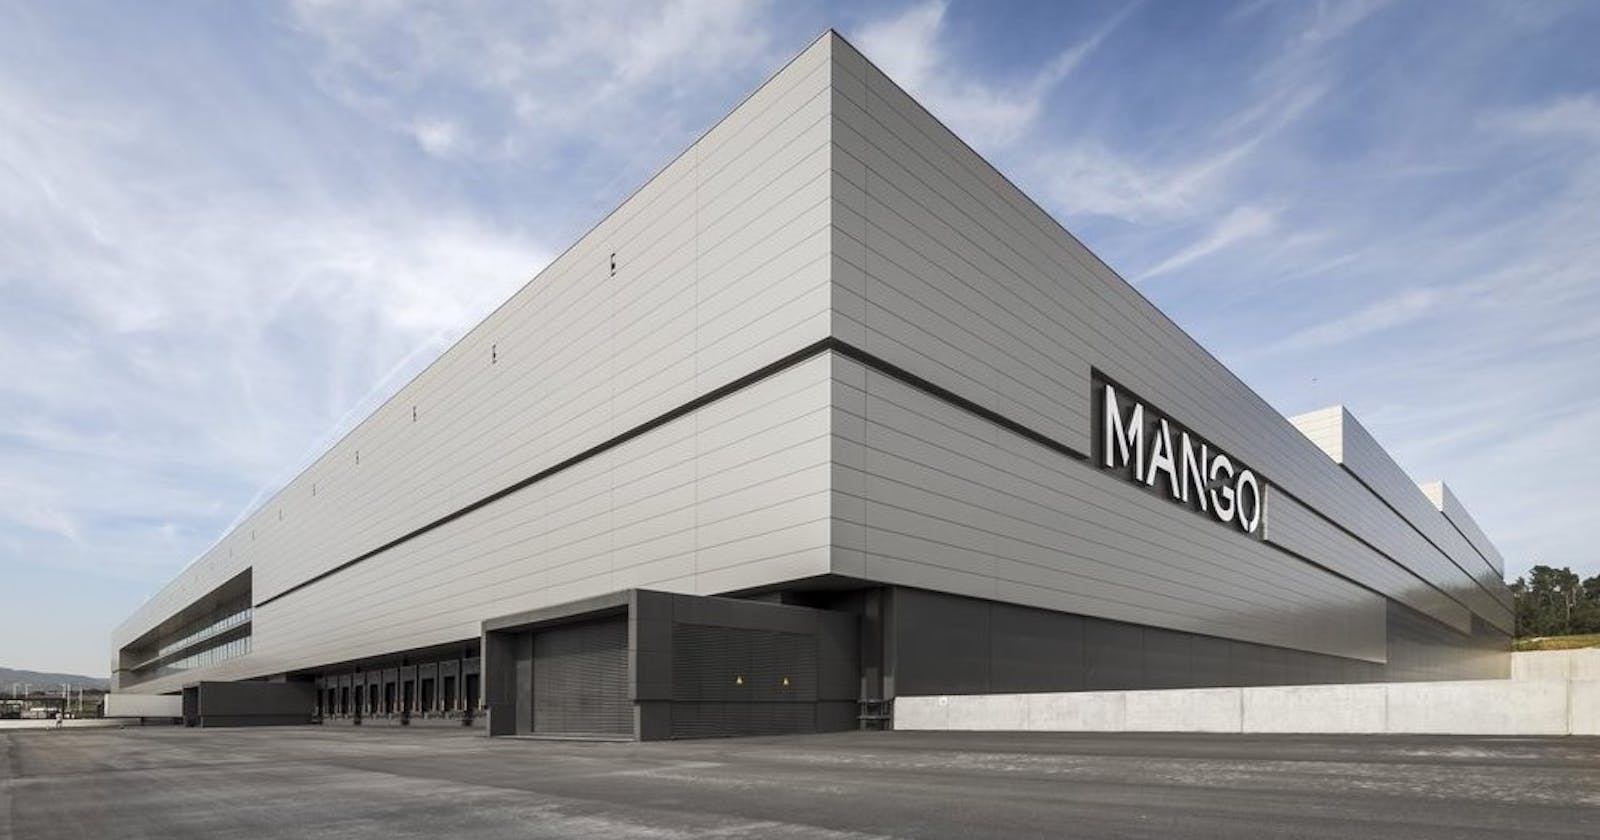 Mango invests 35 million euros to expand logistics center in Spain.